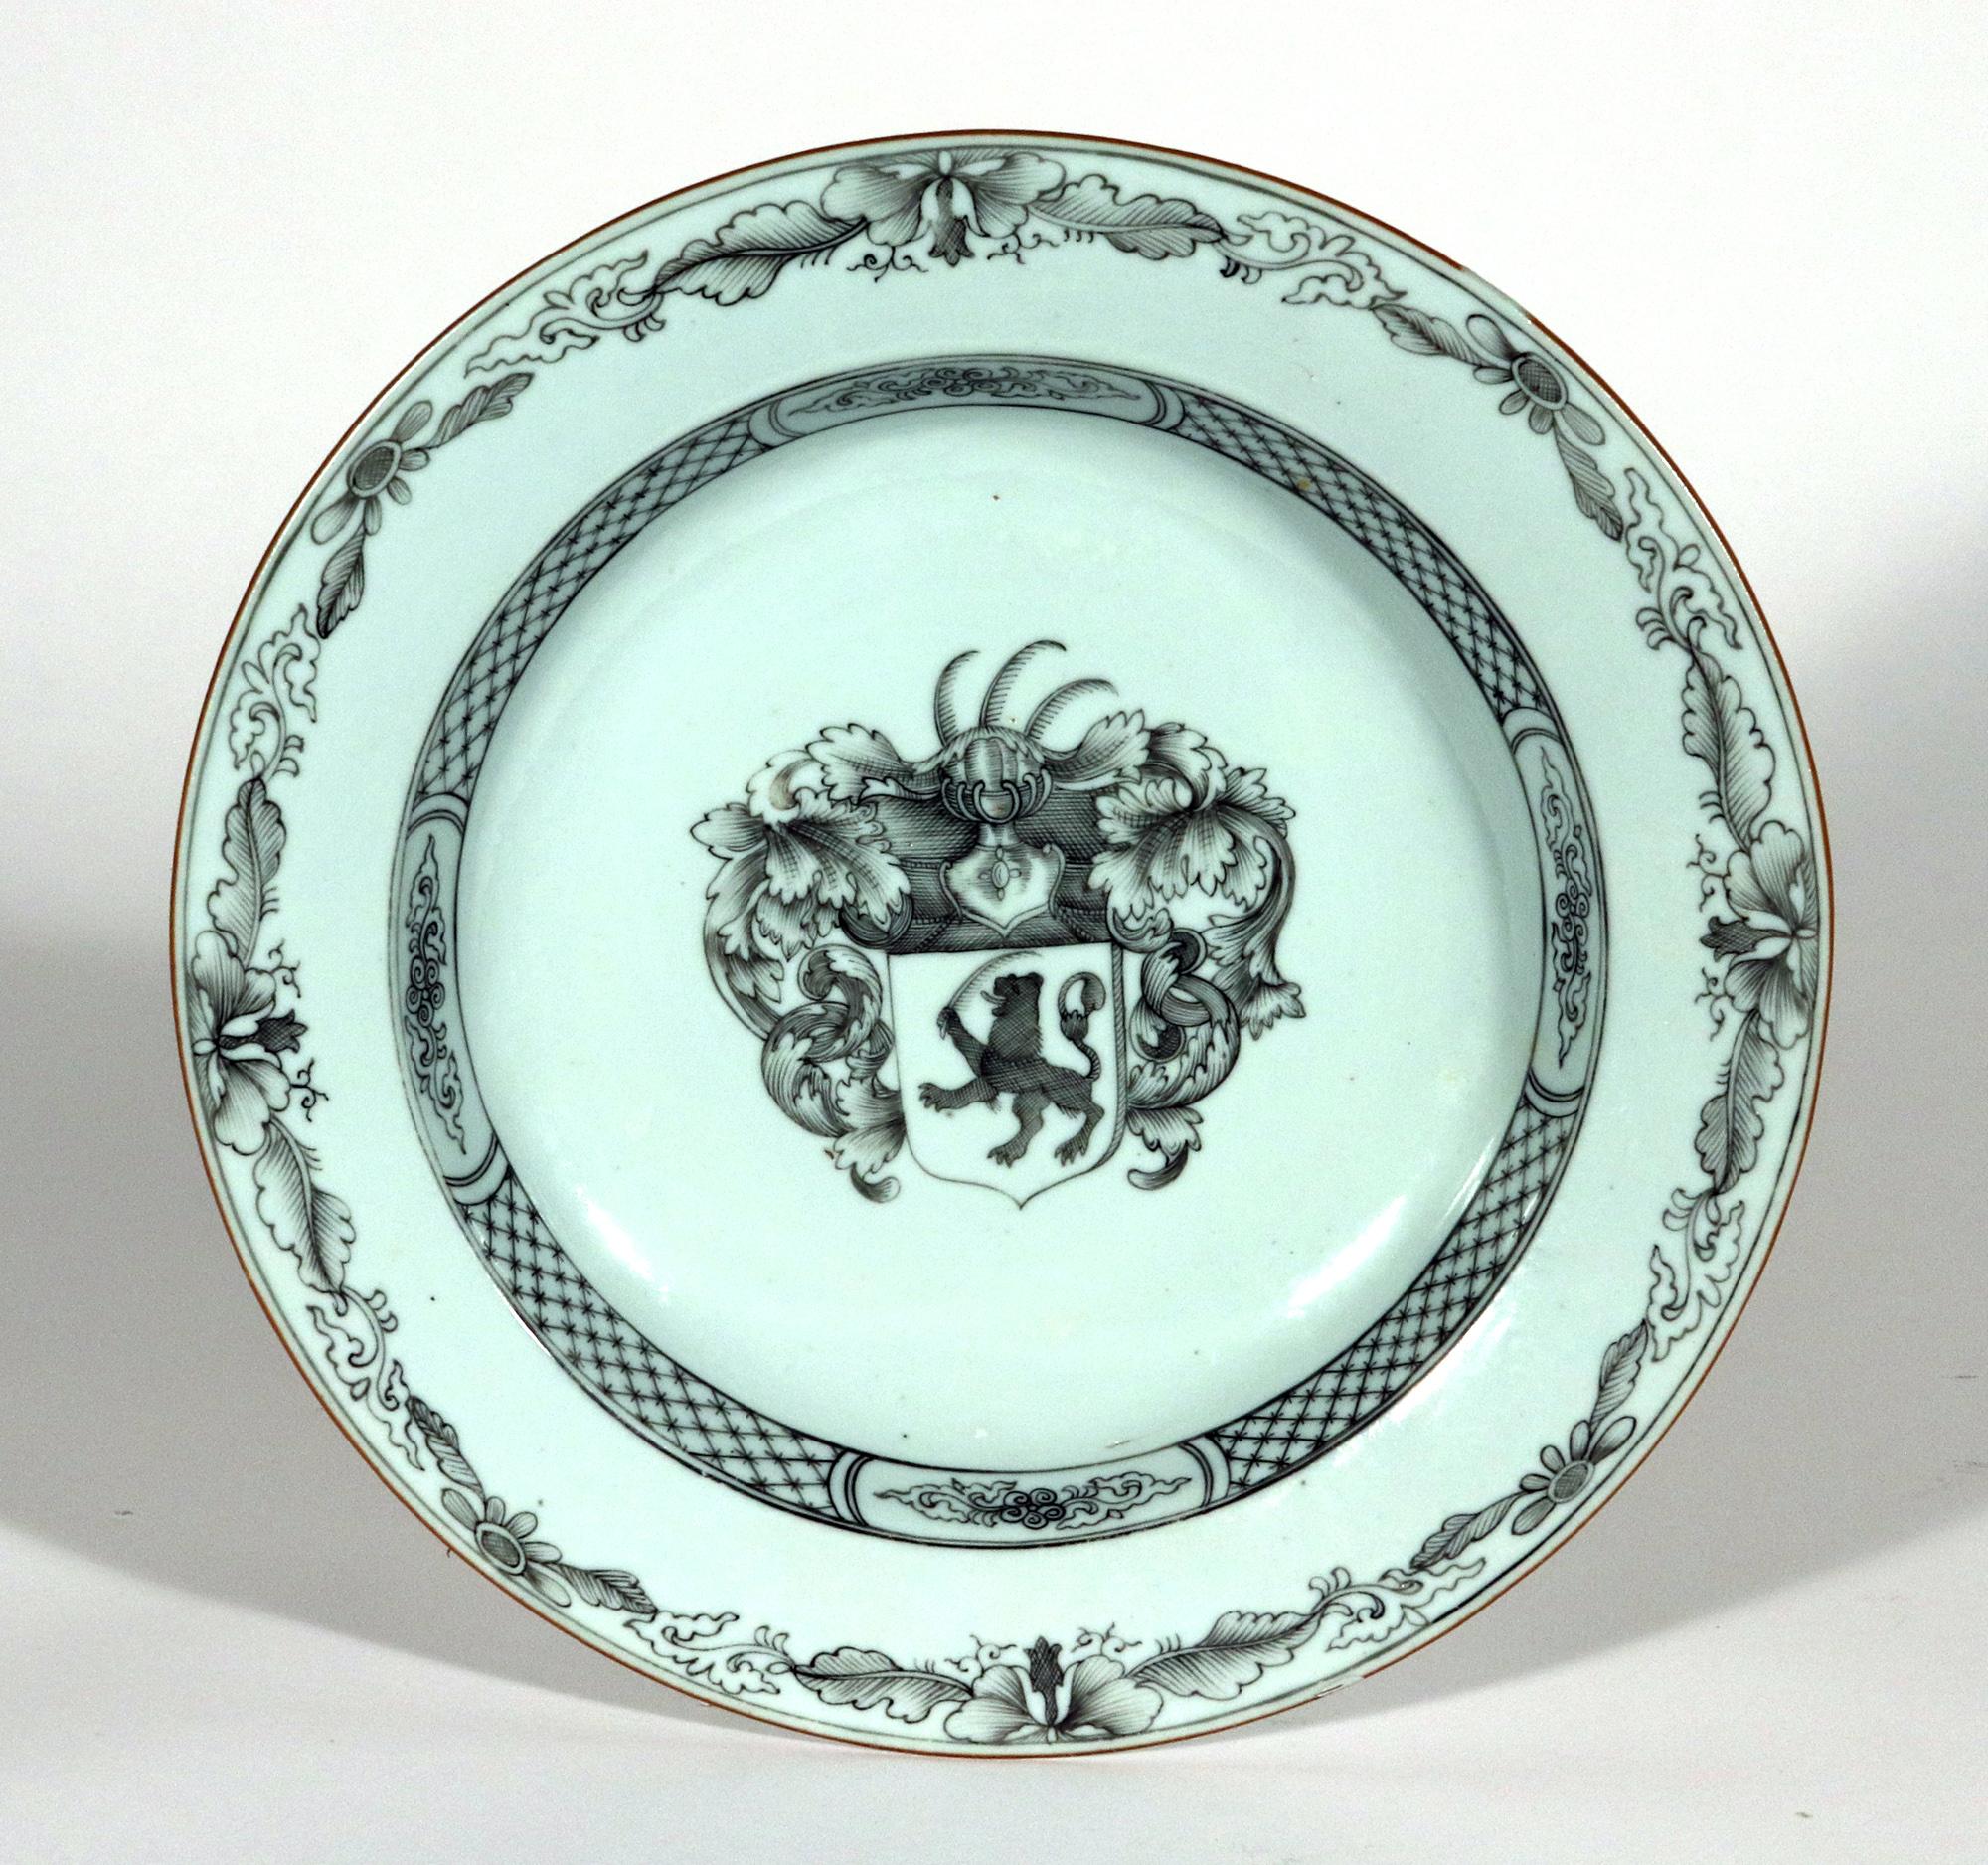 Chinese Export Porcelain Armorial En Grisaille Soup Plates,
Pair,
Circa 1745

Chinese Export porcelain armorial en grisaille services are unusual to find.  This striking pair of soup plates are well painted in en grisaille only with no gold also. 